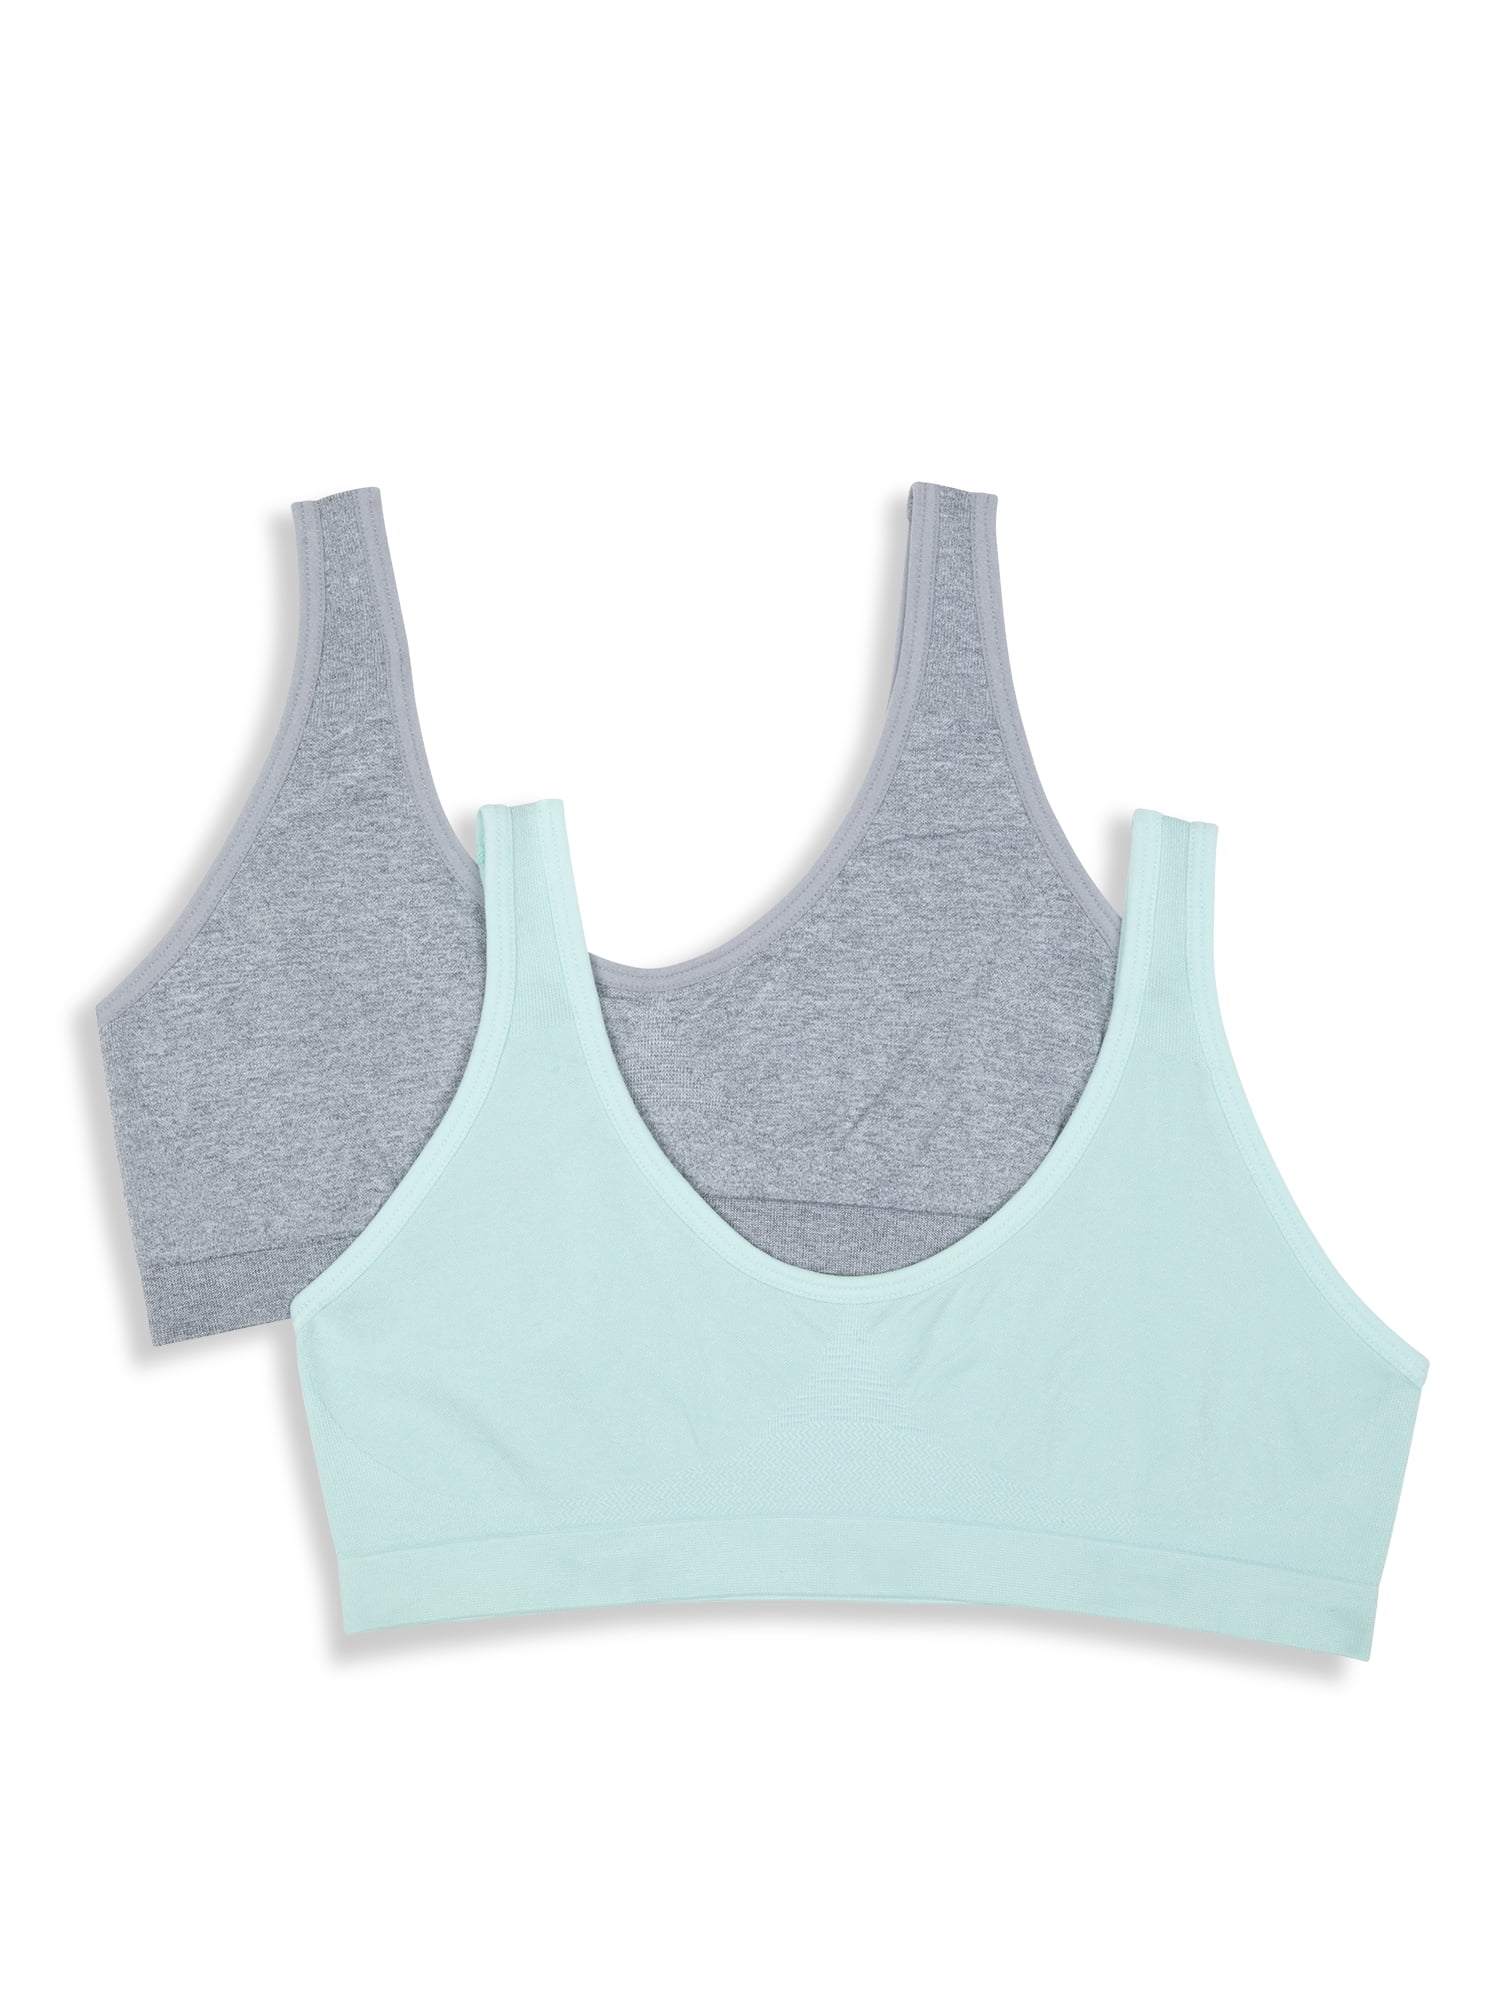 Hanes Girls Youth M 3pk Sports Bra- Teal, White and Tie Dye